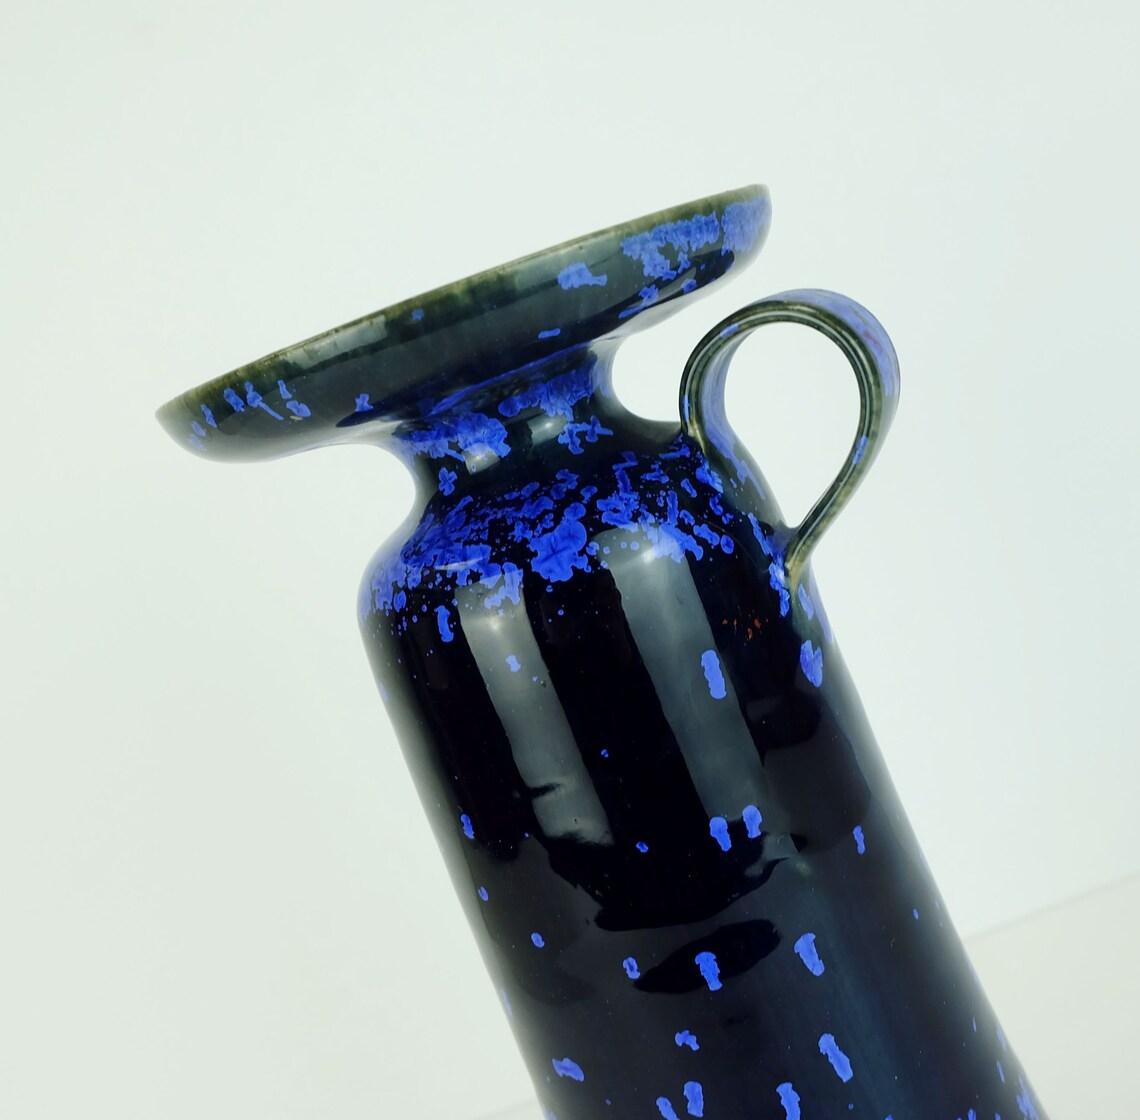 Shapely midcentury vase manufactured by 'Kunsttöpferei Gudrun & Ralf Unterstab' Langenhessen, East Germany. Around late 1960s to 1970s. Black glaze in matt and glossy combined with intense blue. Marked on the bottom. 

Height 10.43